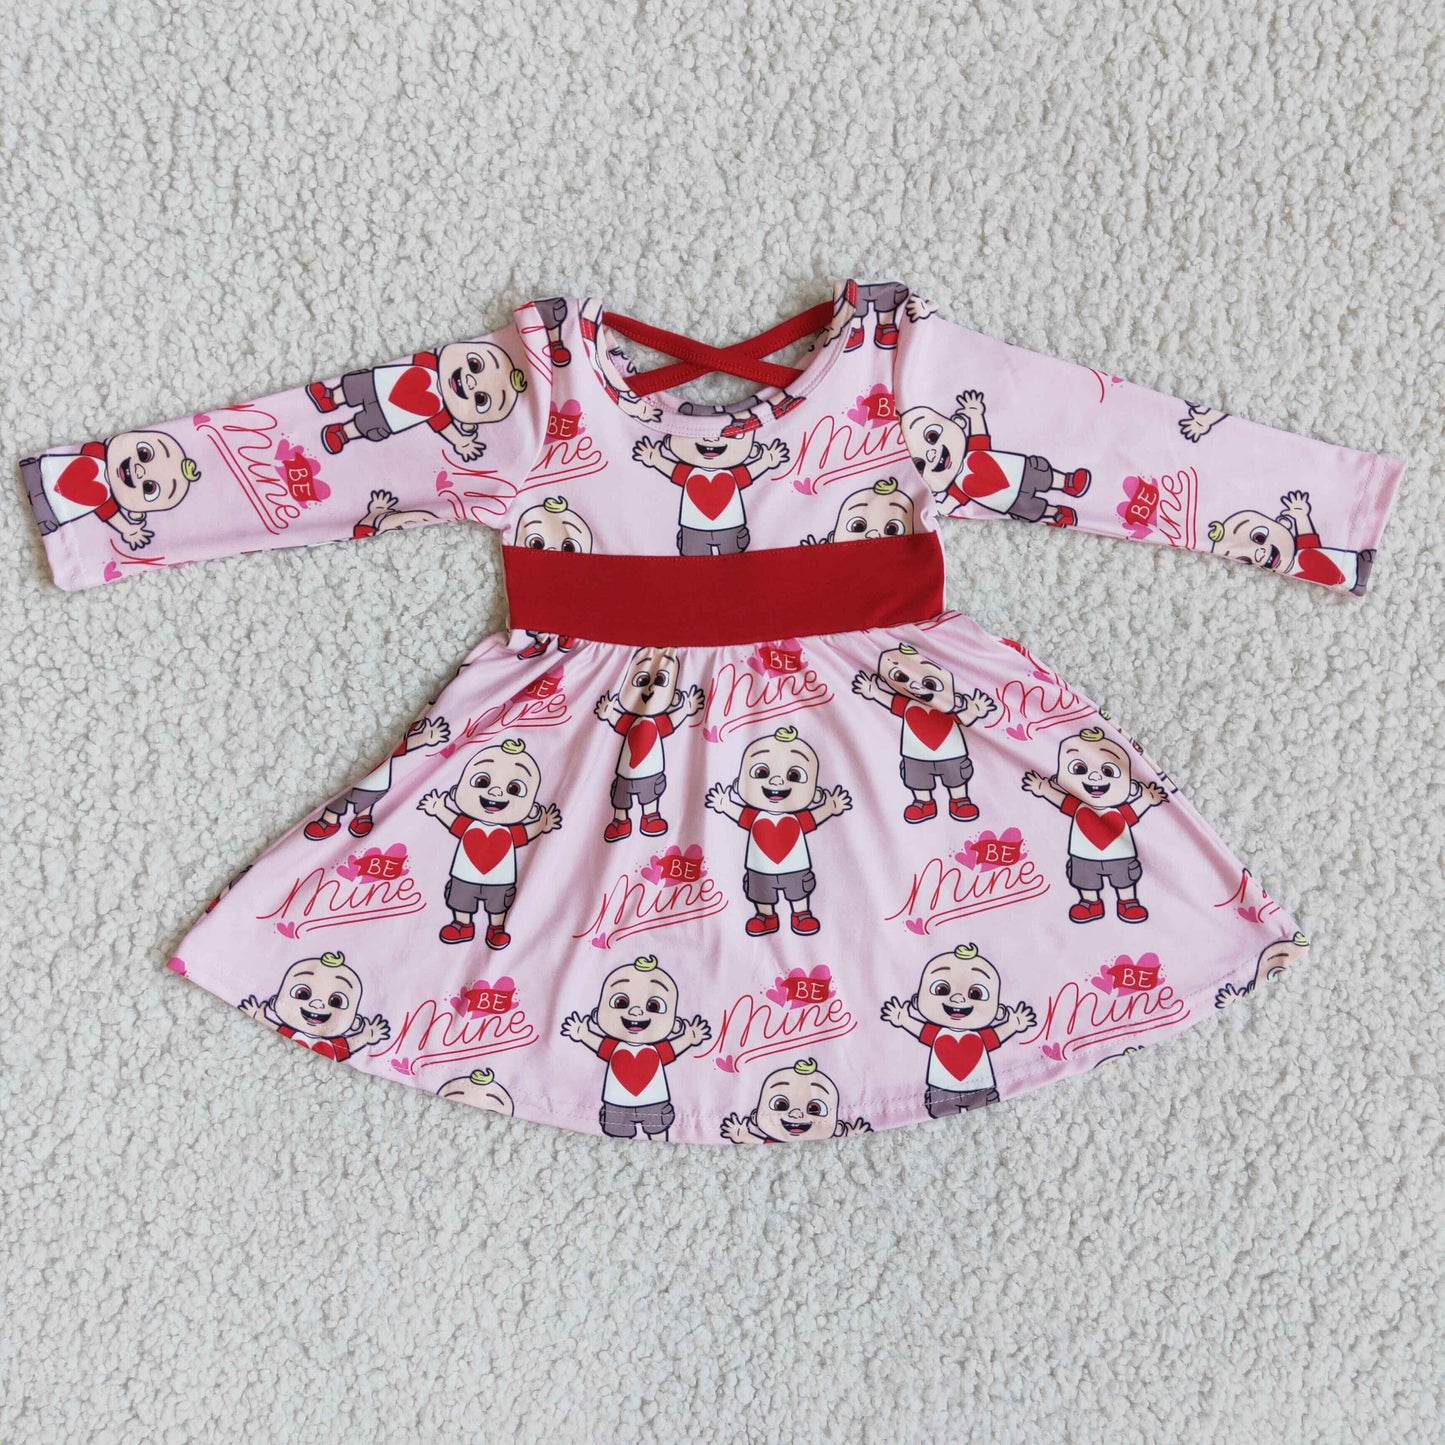 Cute be mine heart print cross dress for valentine's day